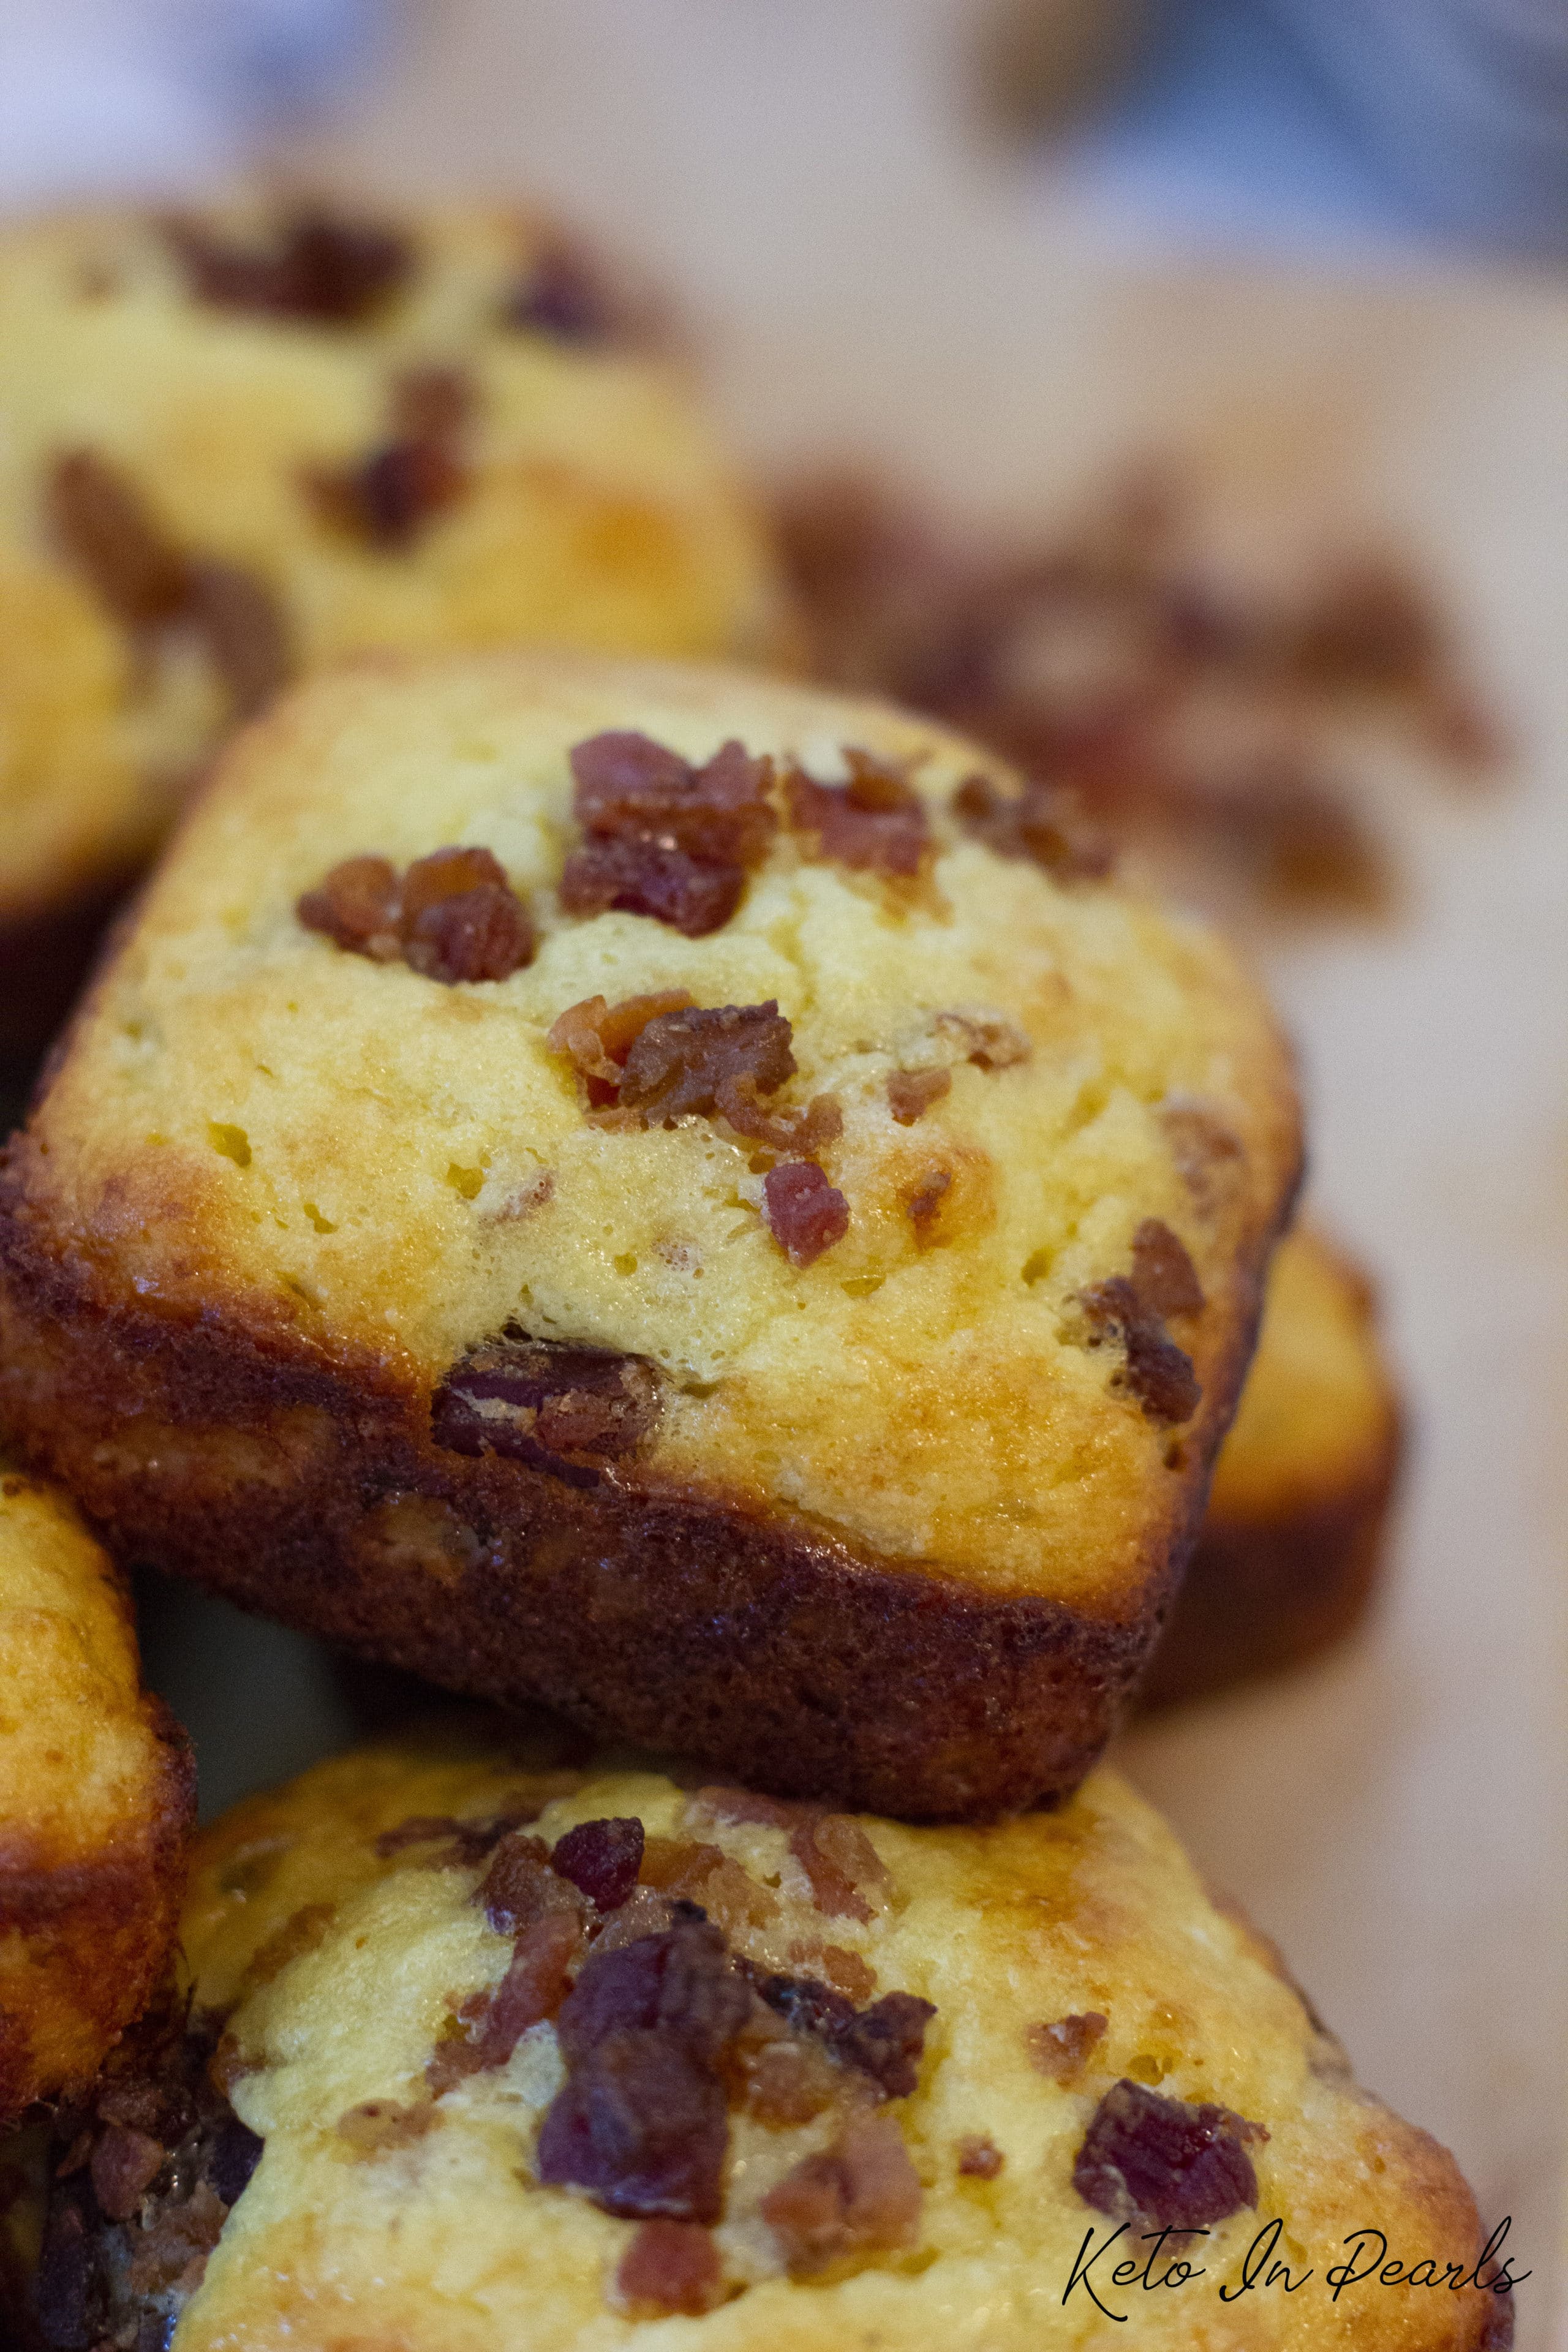 A sweet and salty maple keto bacon cornbread that is grain free, gluten free, and keto friendly. Only 2 net carbs per muffin. The best sweet keto cornbread!